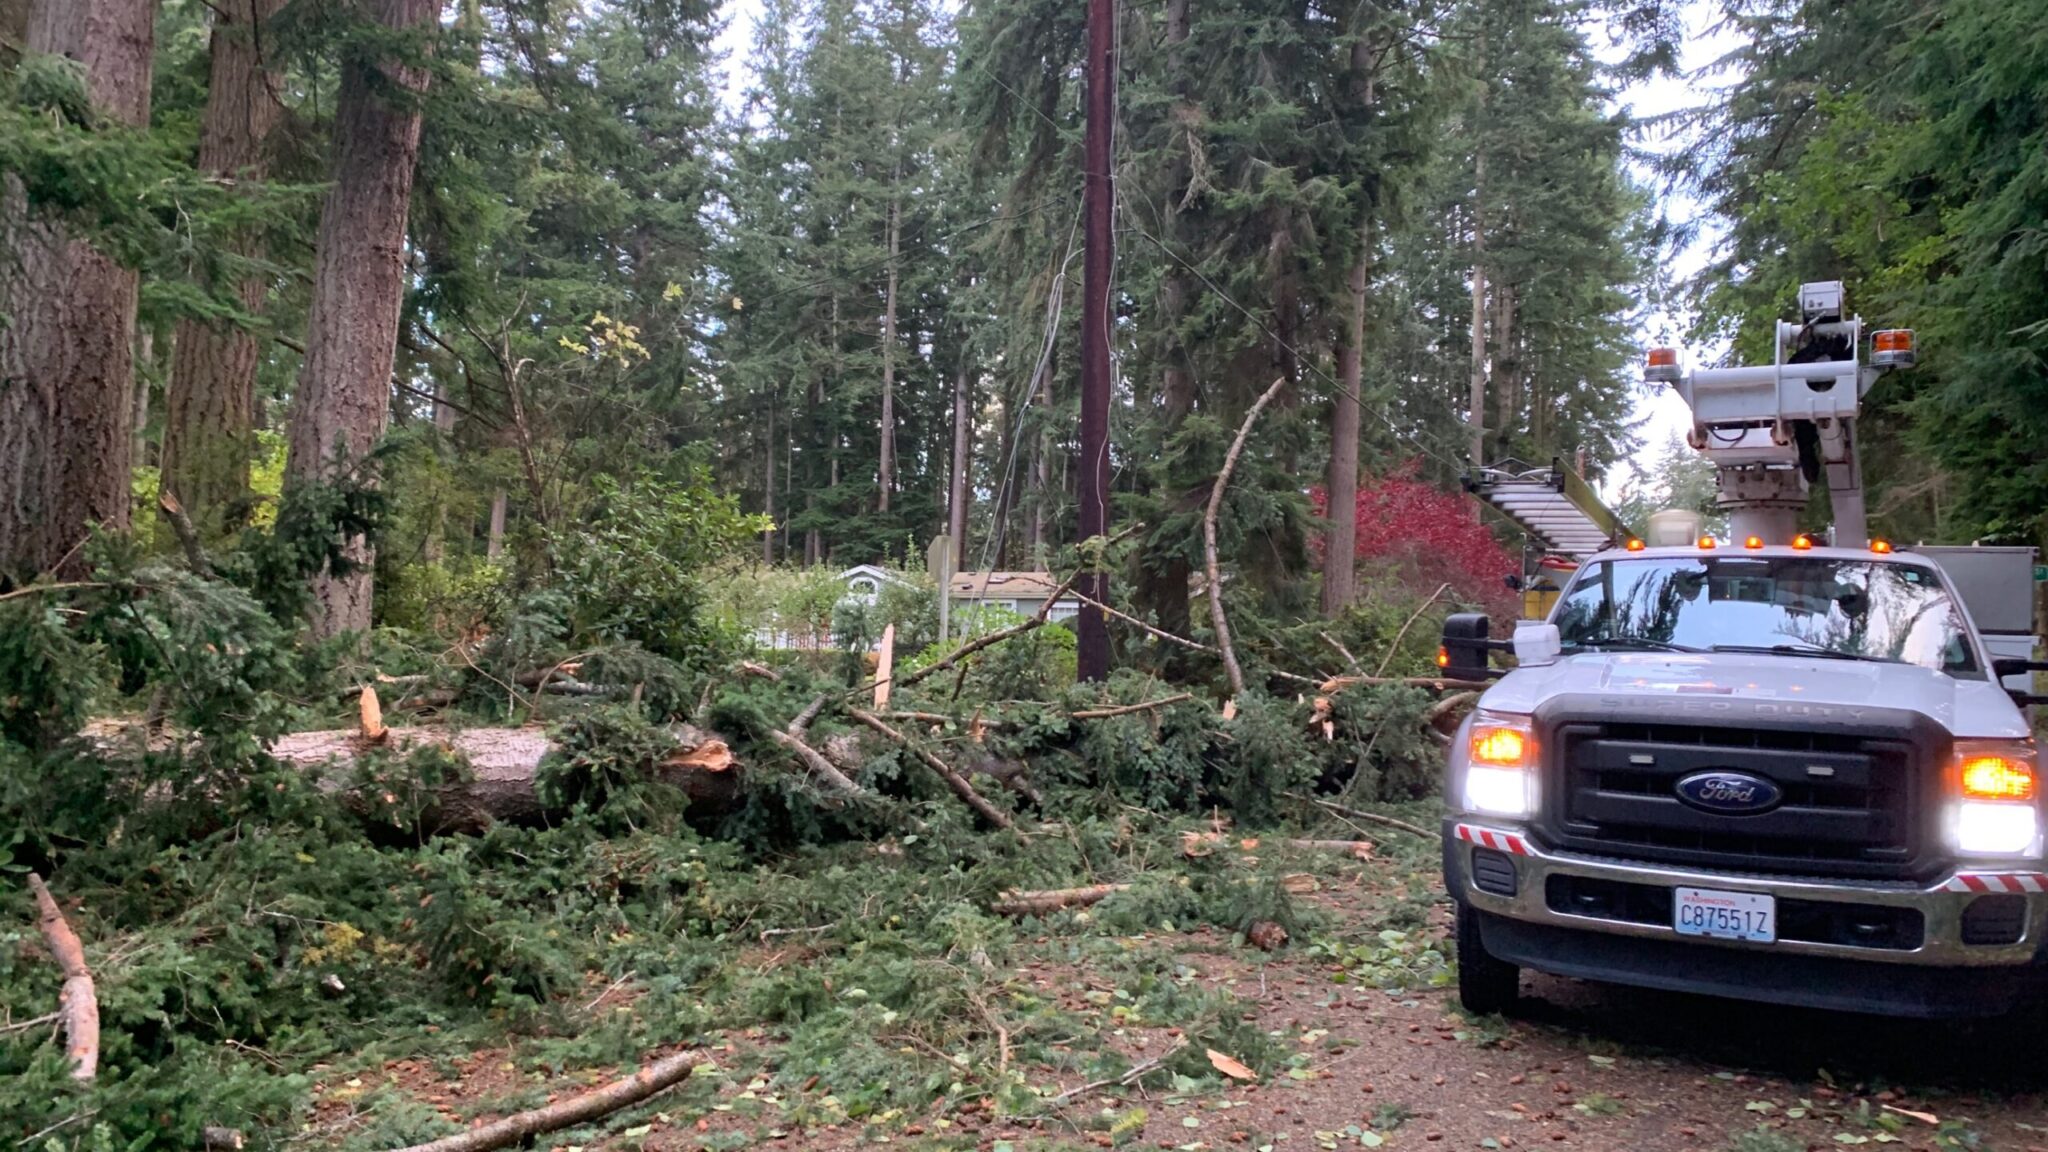 An Xfinity truck is parked with an Xfinity technician working next to downed trees.